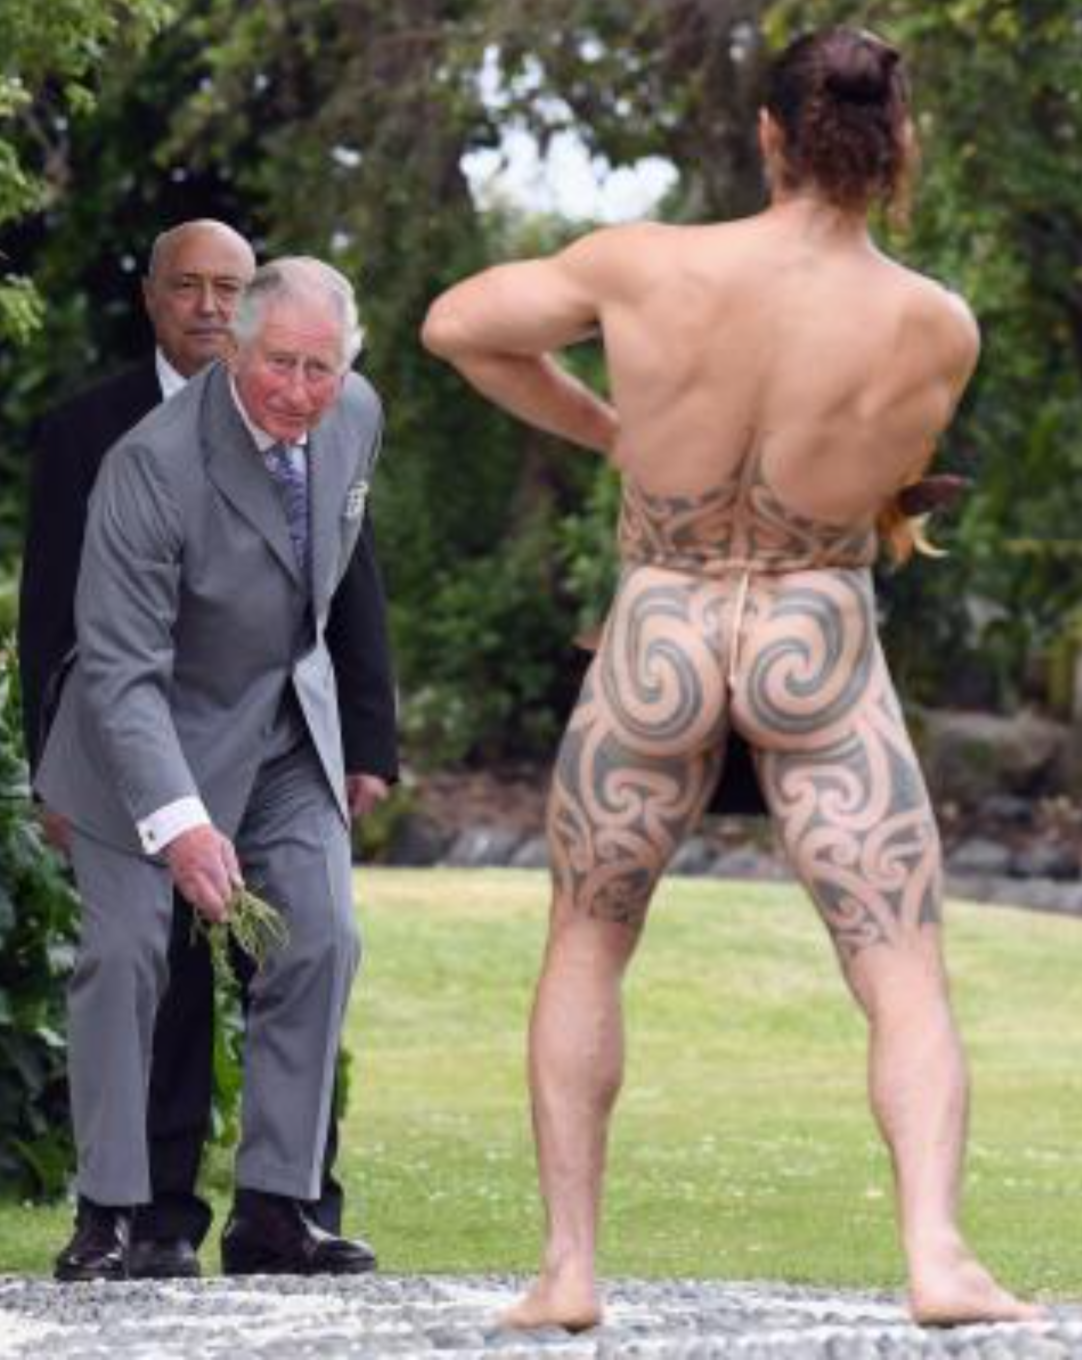 Prince Charles enjoying a traditional welcome to Kaikoura, New Zealand, during a six-day trip with the Duchess of Cornwall. He will visit the Solomon Islands today. Image by Kai Schwoerer. New Zealand, 2019.